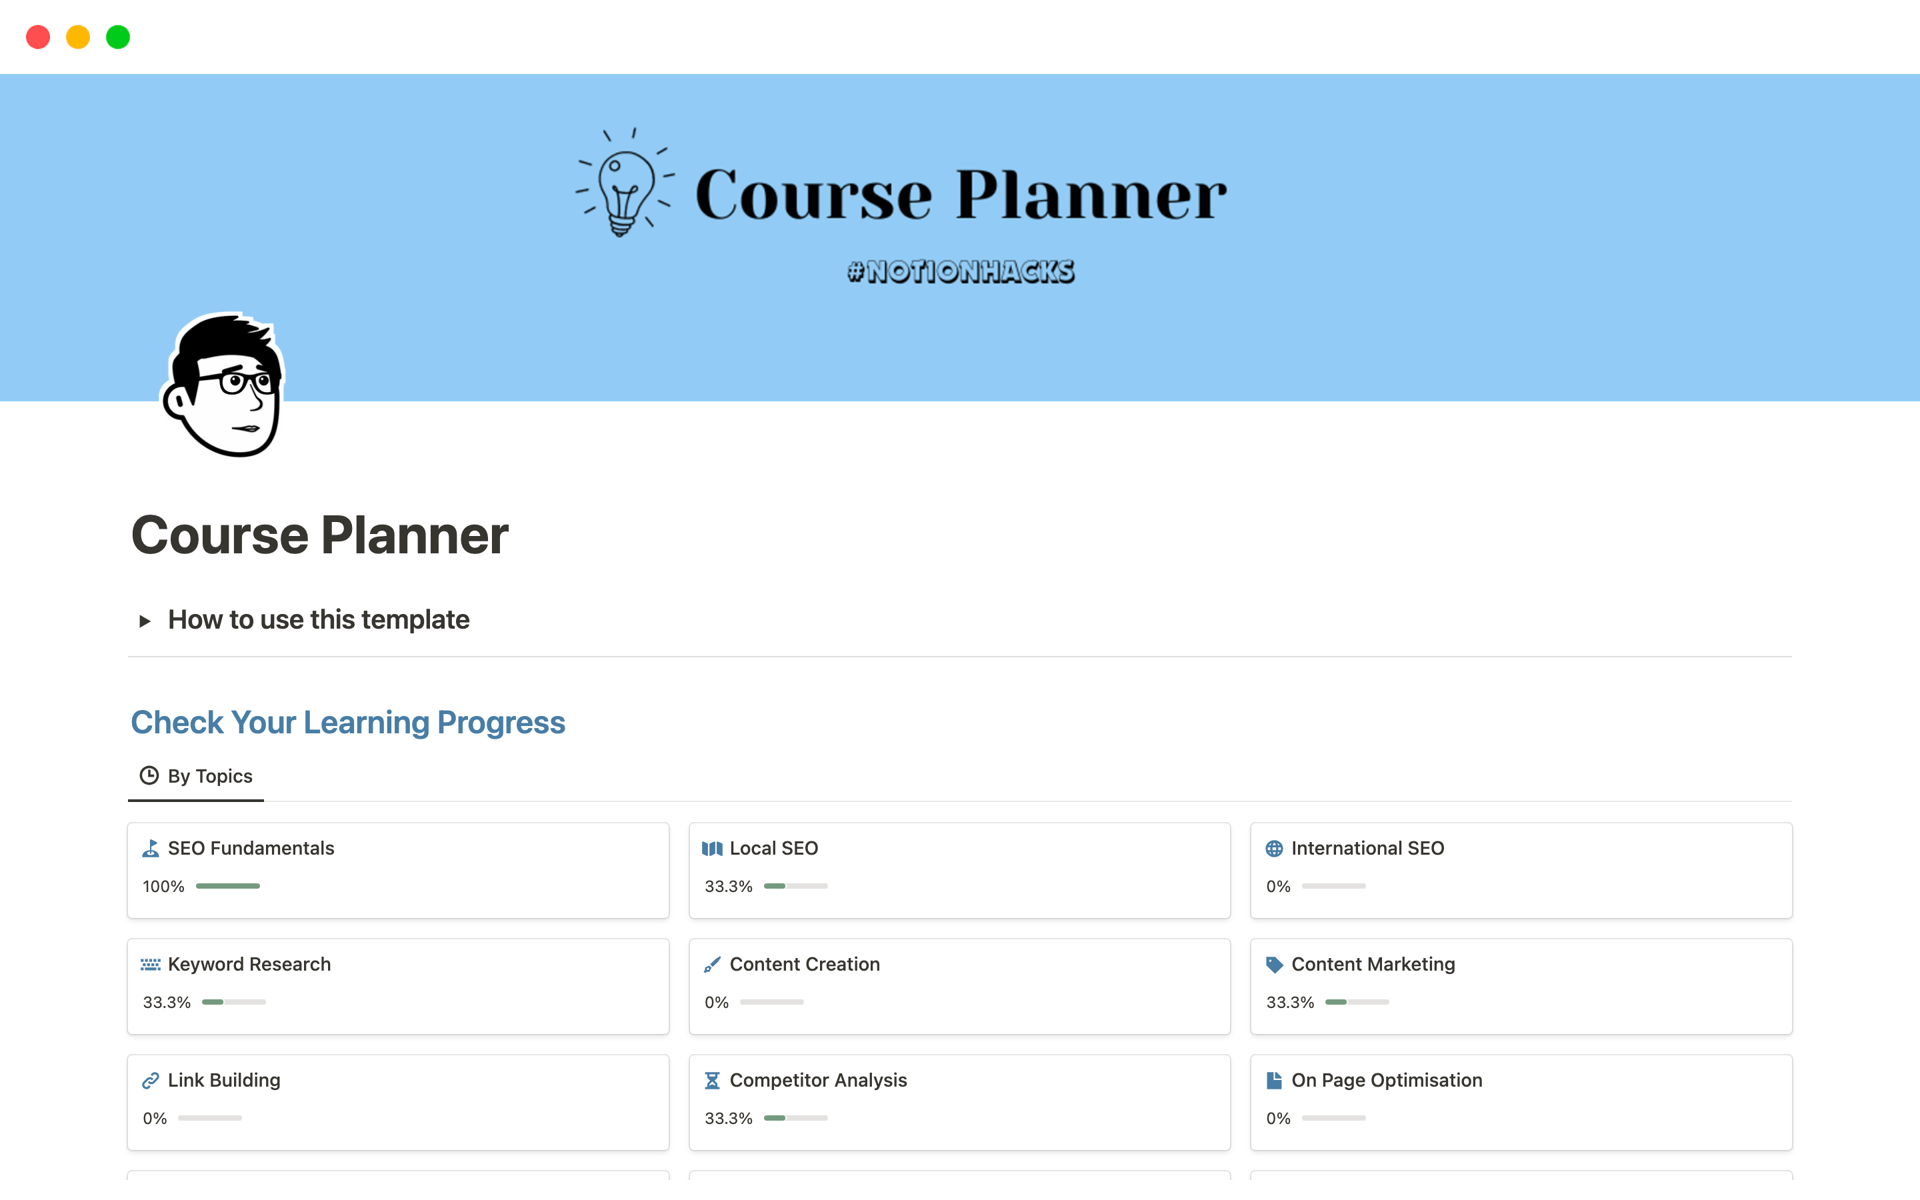 This simple template helps you to create course outlines, organize learning materials into topics, and track your learning progress as you check off the items!